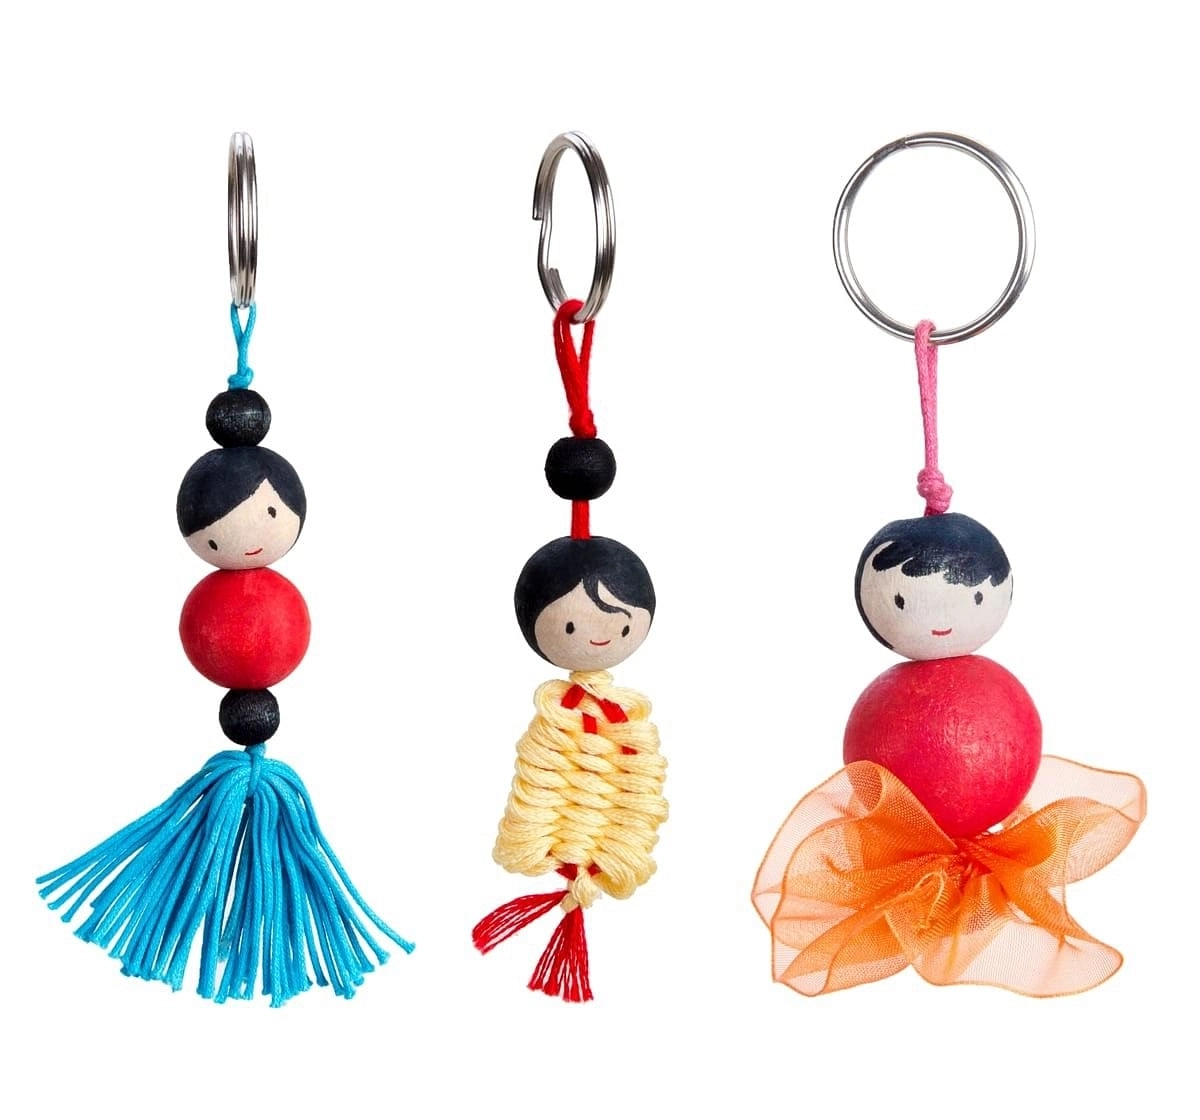 Chalk and Chuckles Keychain Dolls Making Kit. DIY Art and Craft Activity  Set for Kids 8 Years and Up and Creative Adults.